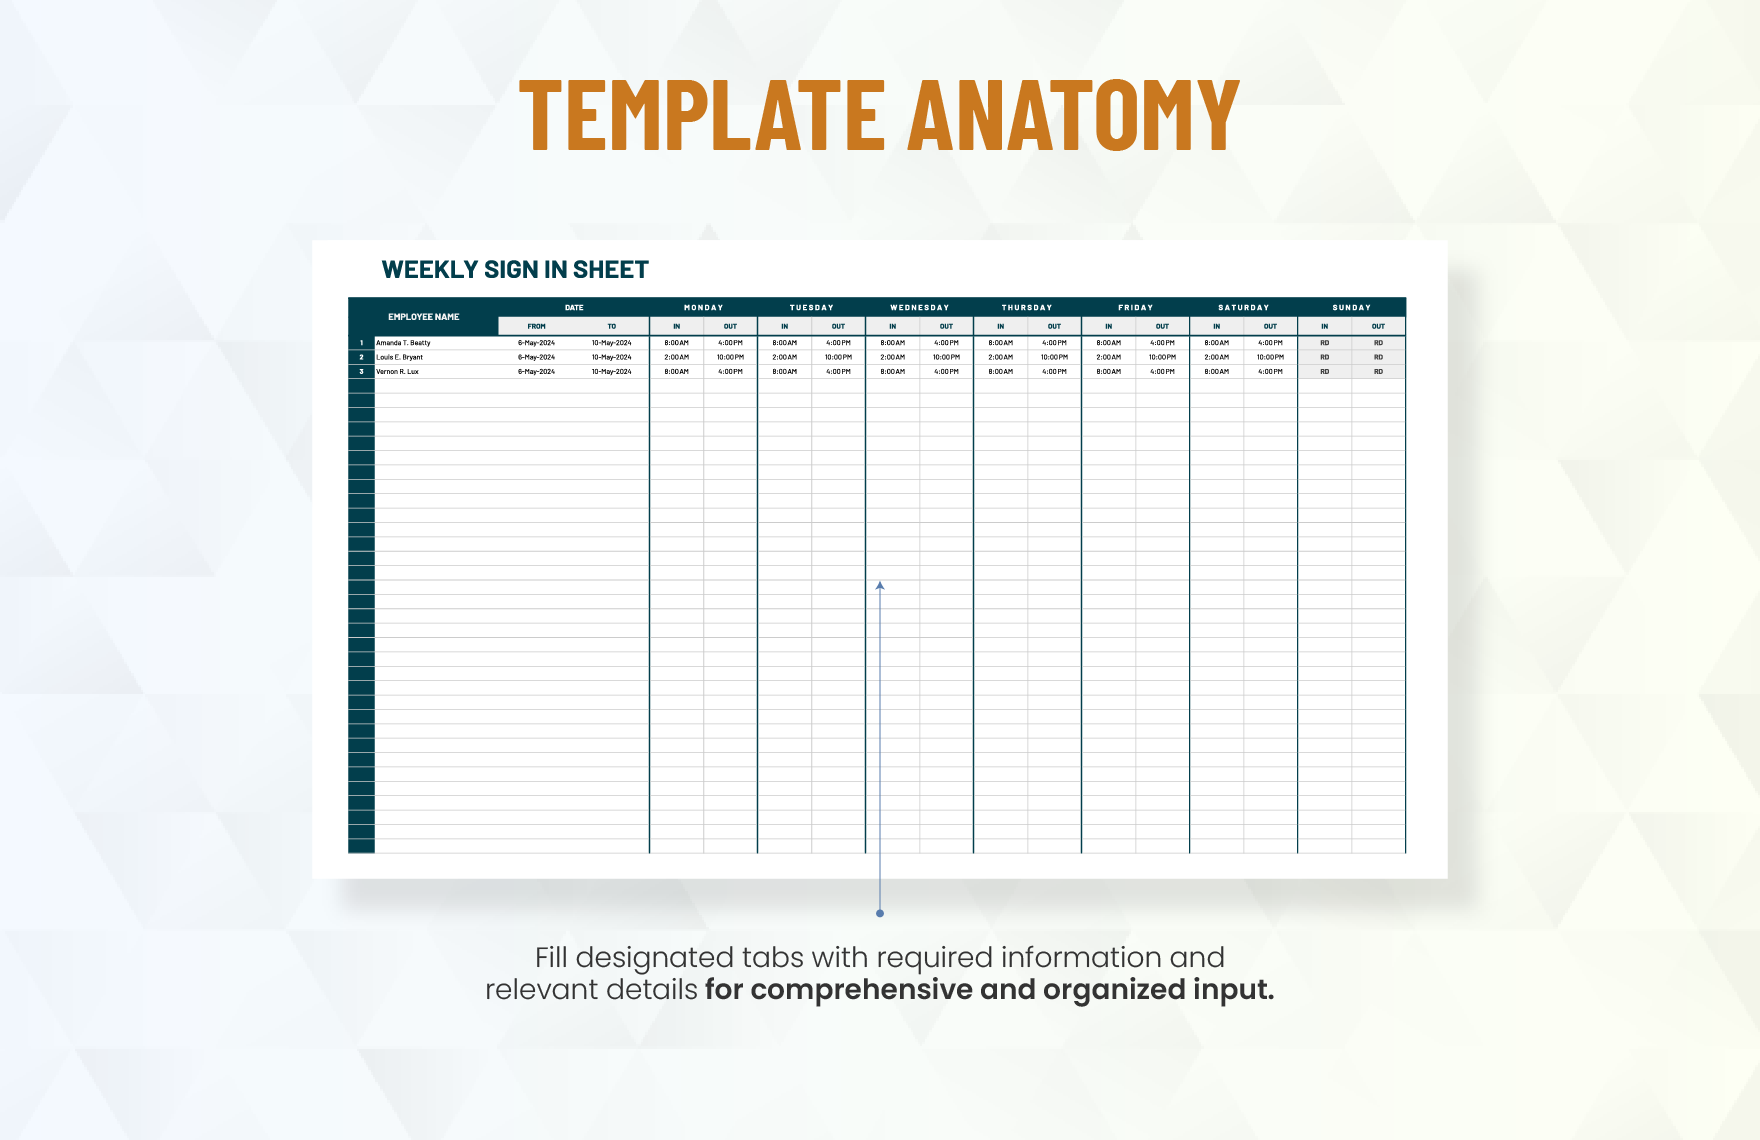 Weekly Sign in Sheet Template